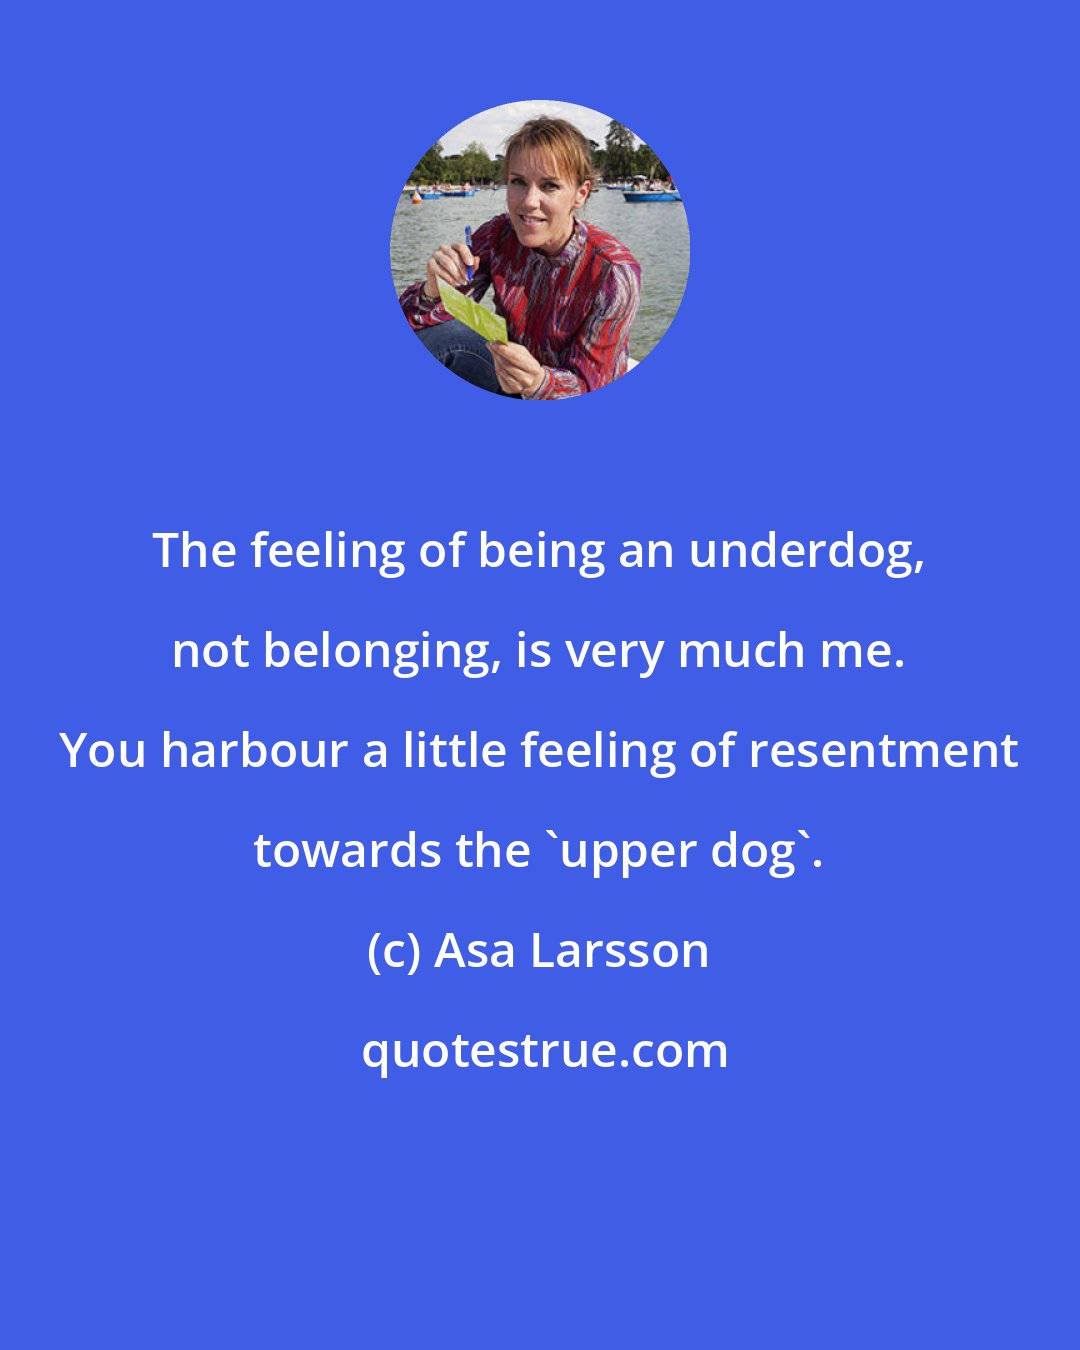 Asa Larsson: The feeling of being an underdog, not belonging, is very much me. You harbour a little feeling of resentment towards the 'upper dog'.